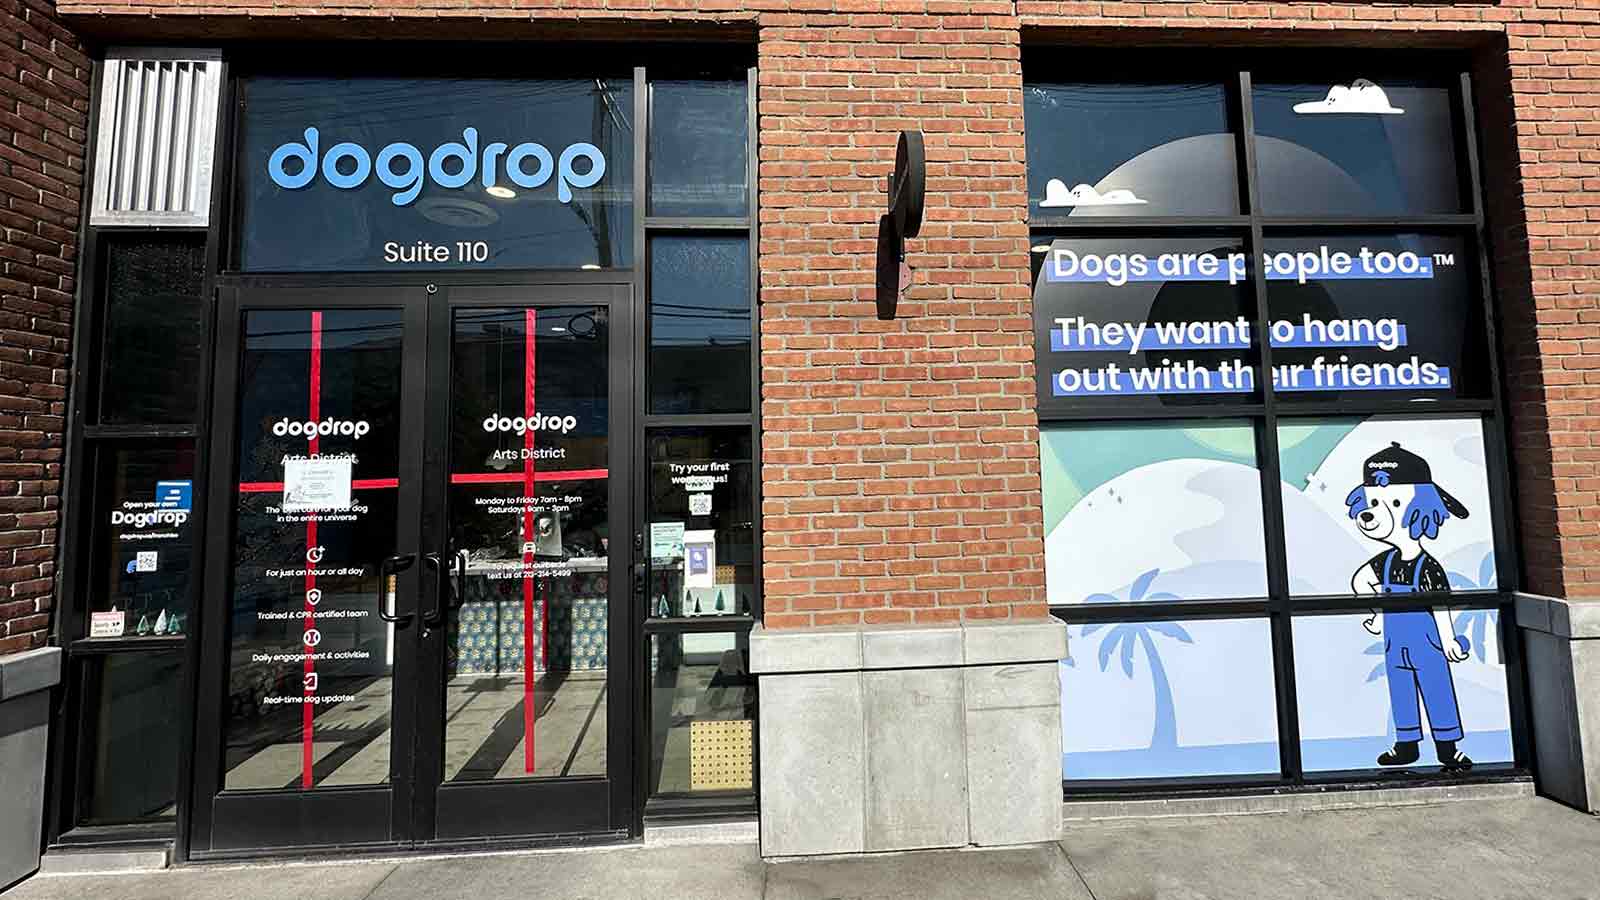 Dogdrop window decals applied to the storefront